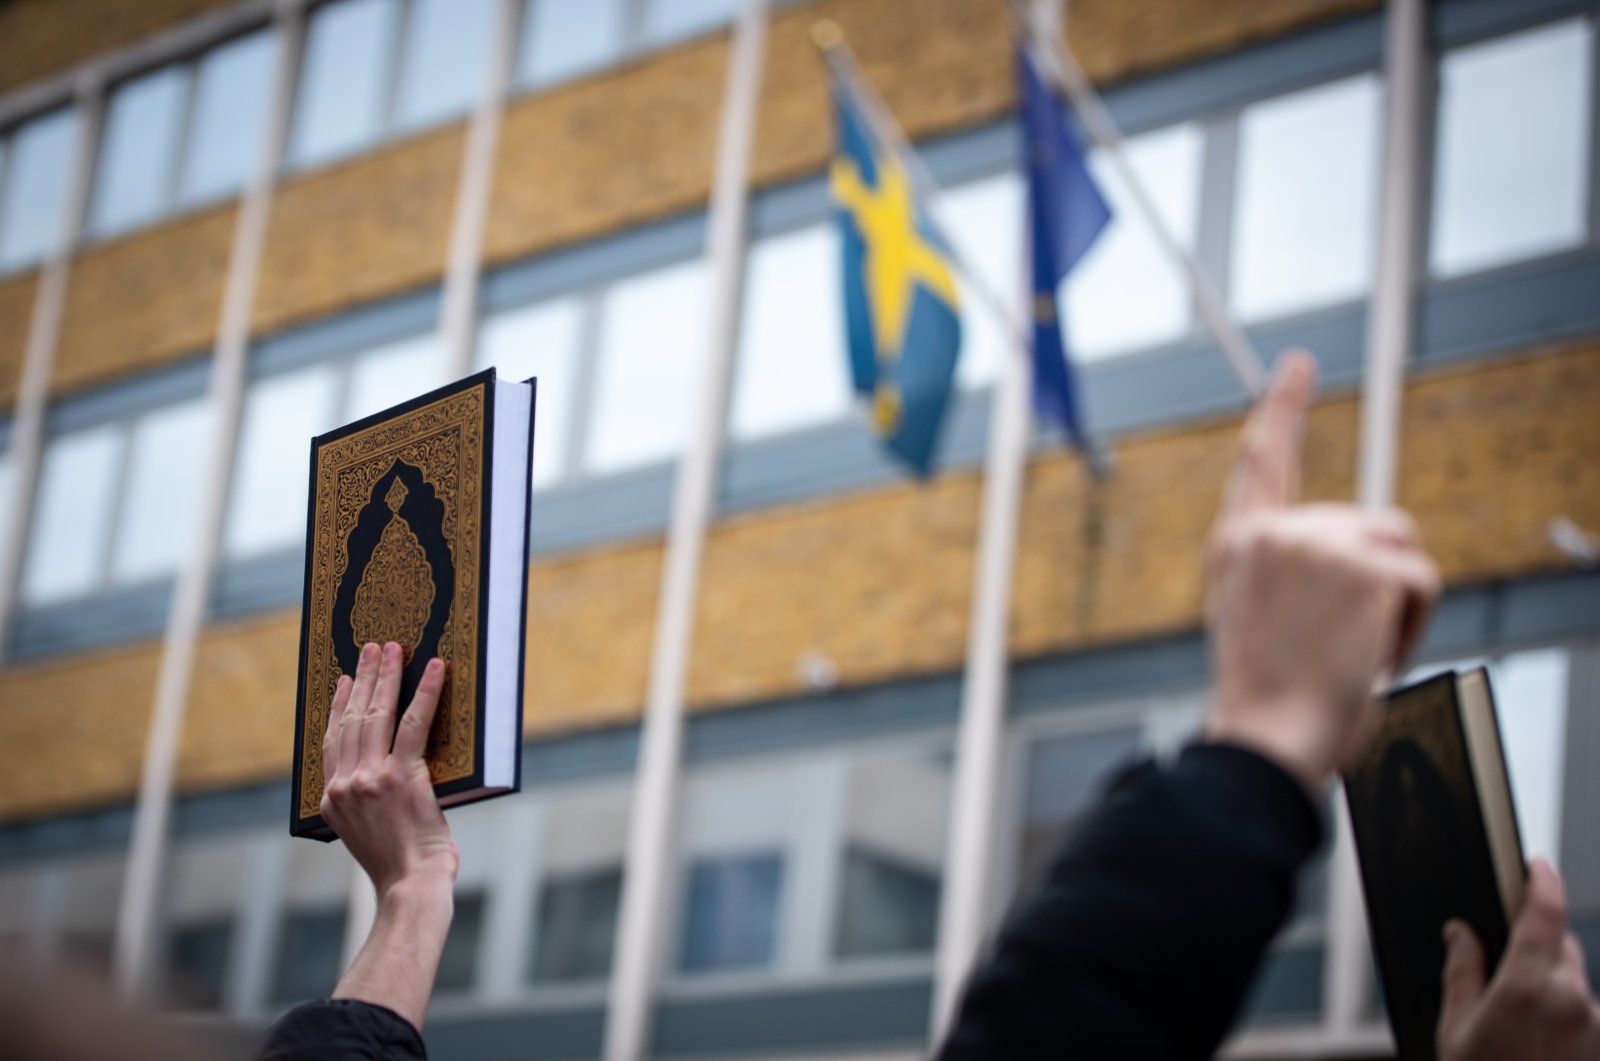 Protestors raise the Quran during the demonstration against the Quran Burning In Sweden, January 27, 2023. (Reuters File Photo)